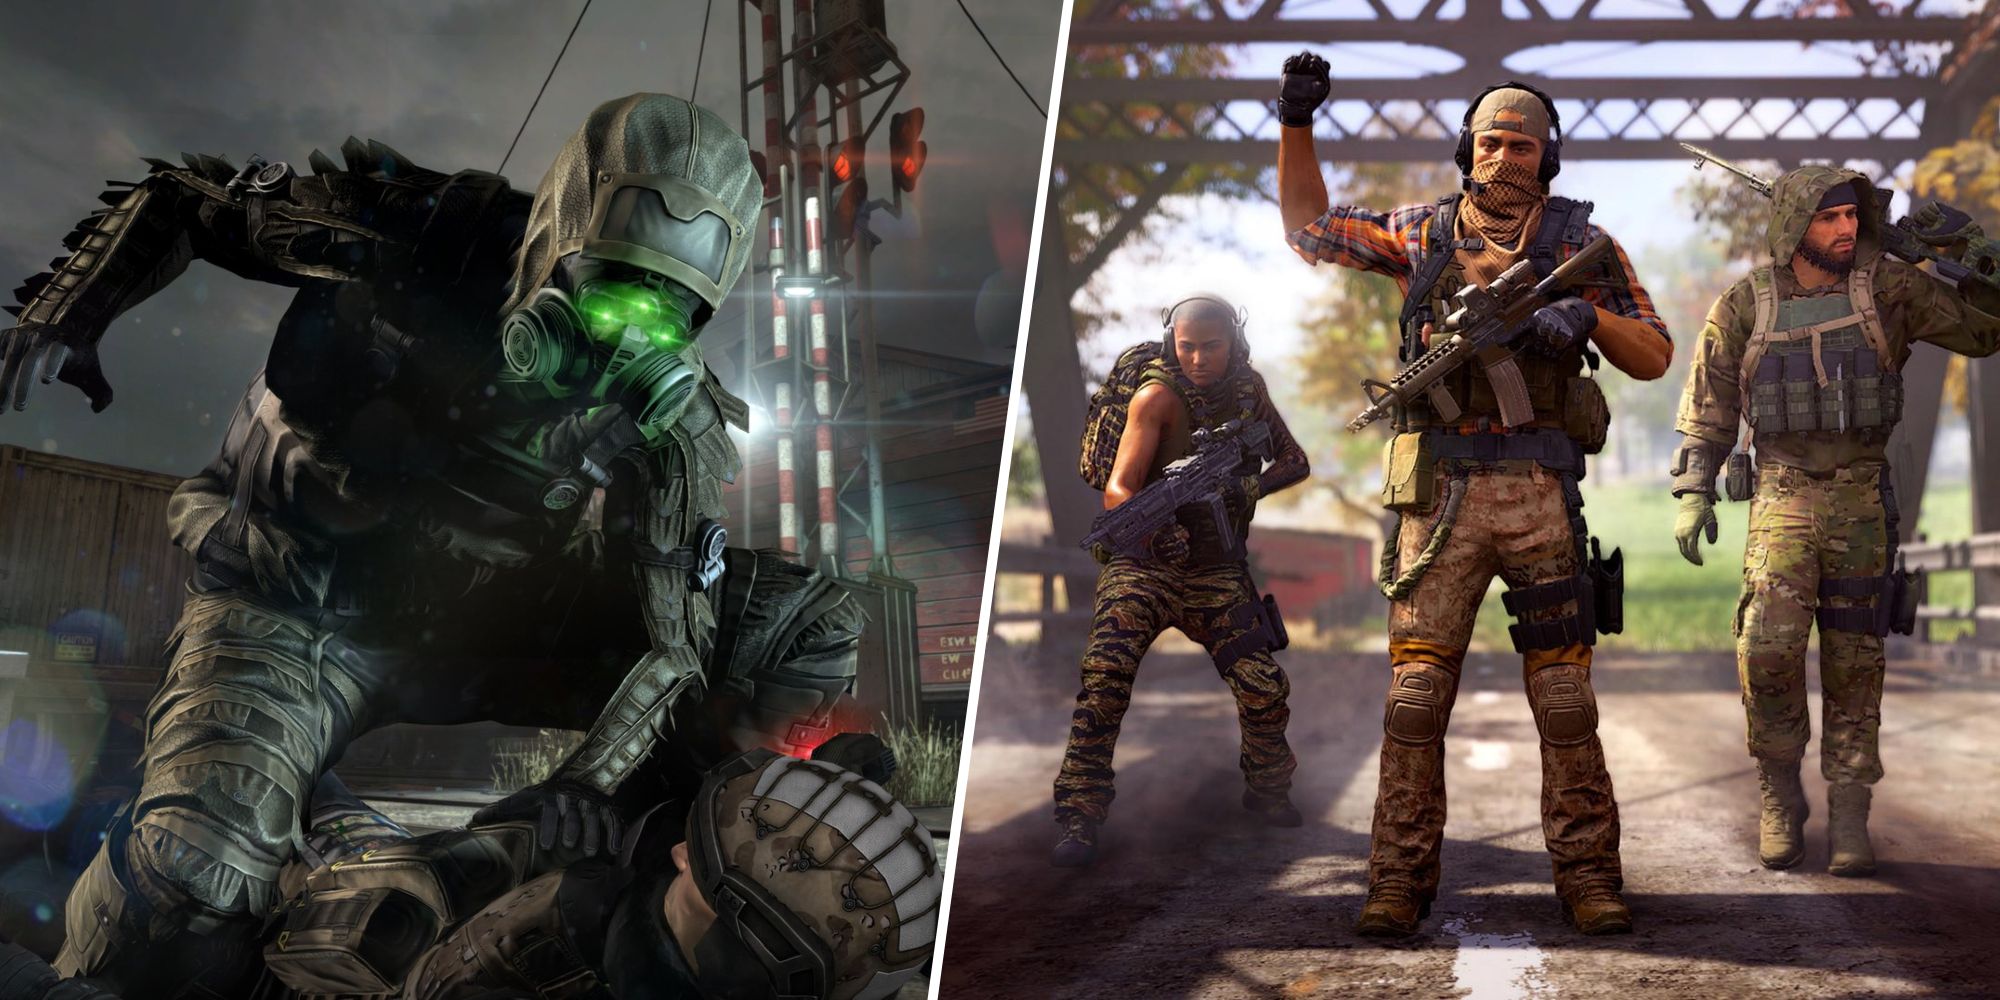 A soldier in Splinter Cell and soldier from Ghost Recon Frontline